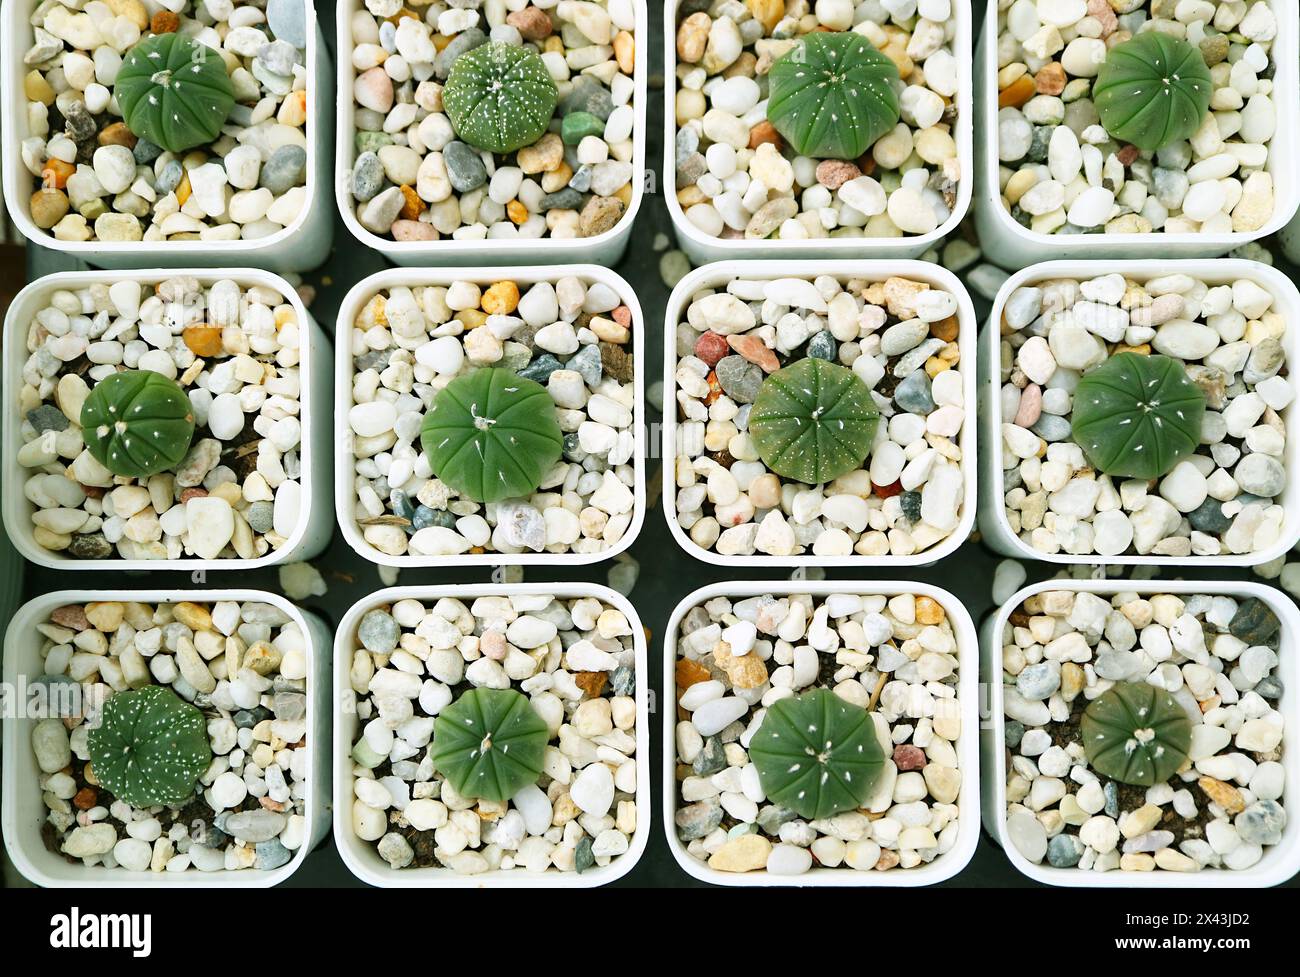 Rows of Adorable Tiny Potted Sand Dollar Cactus Plants or Astrophytum Asterias Stock Photo